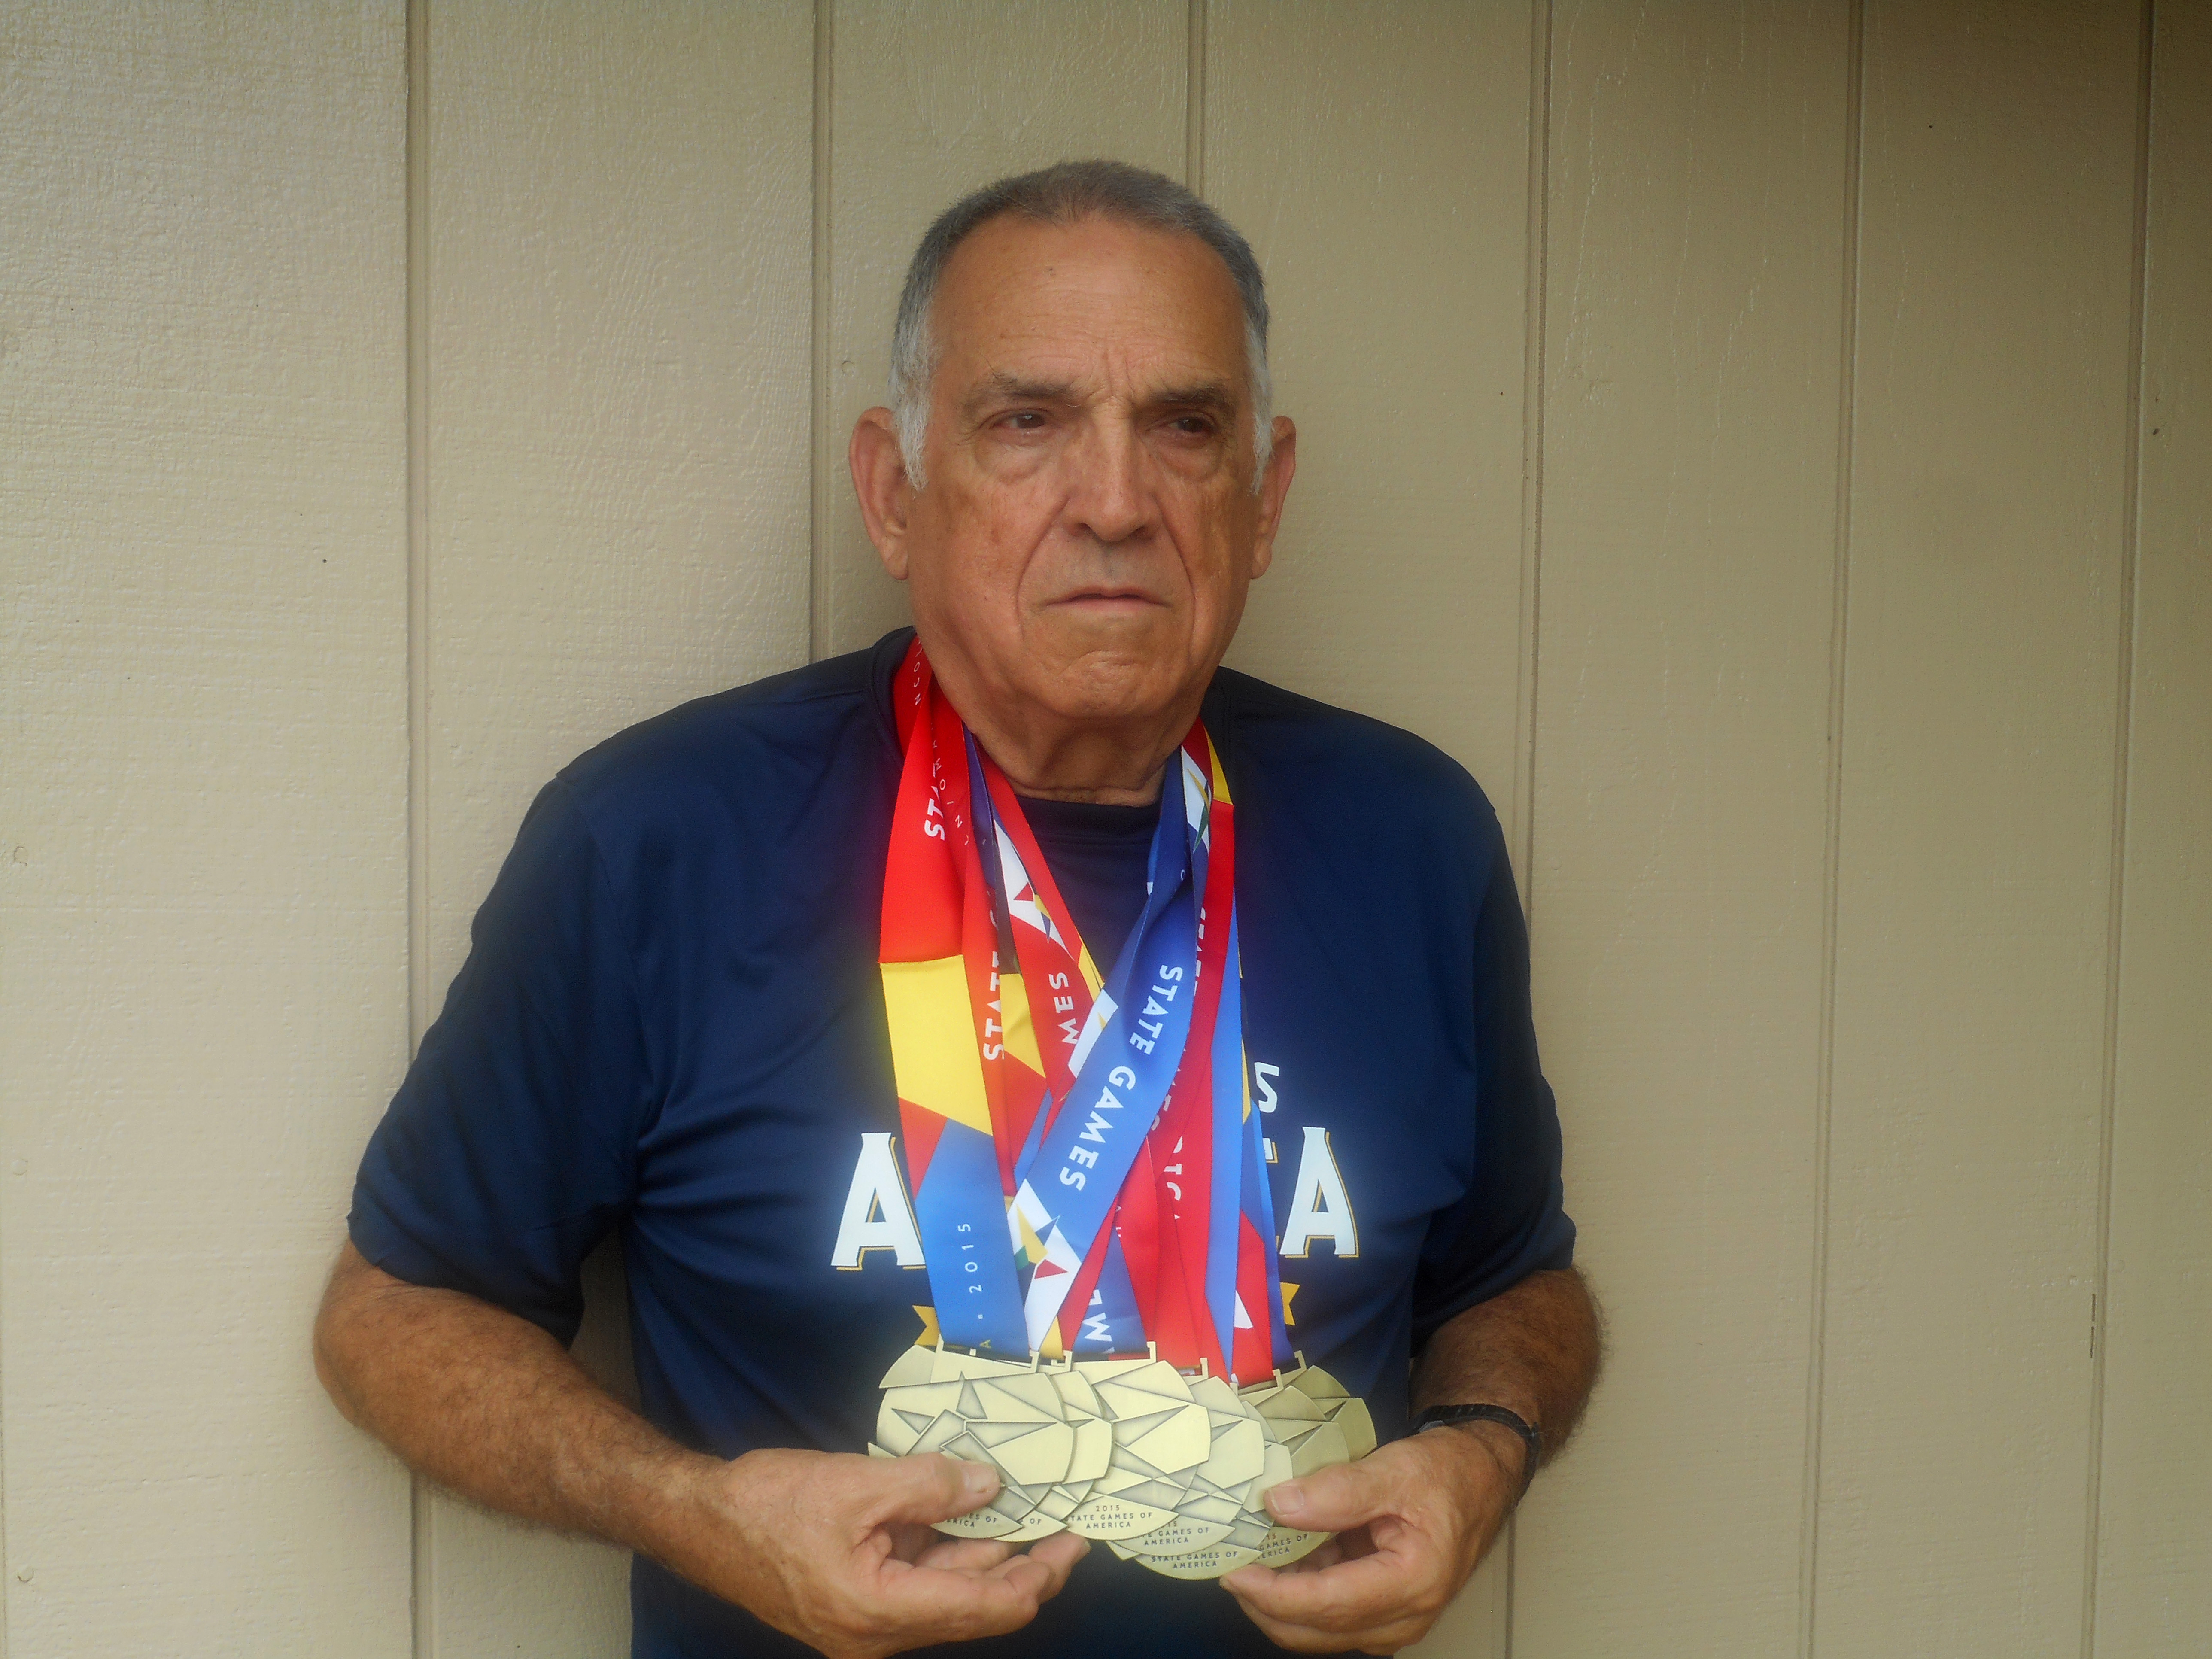 Ron Snipe with the medals he won at the State Games of America in Nebraska.